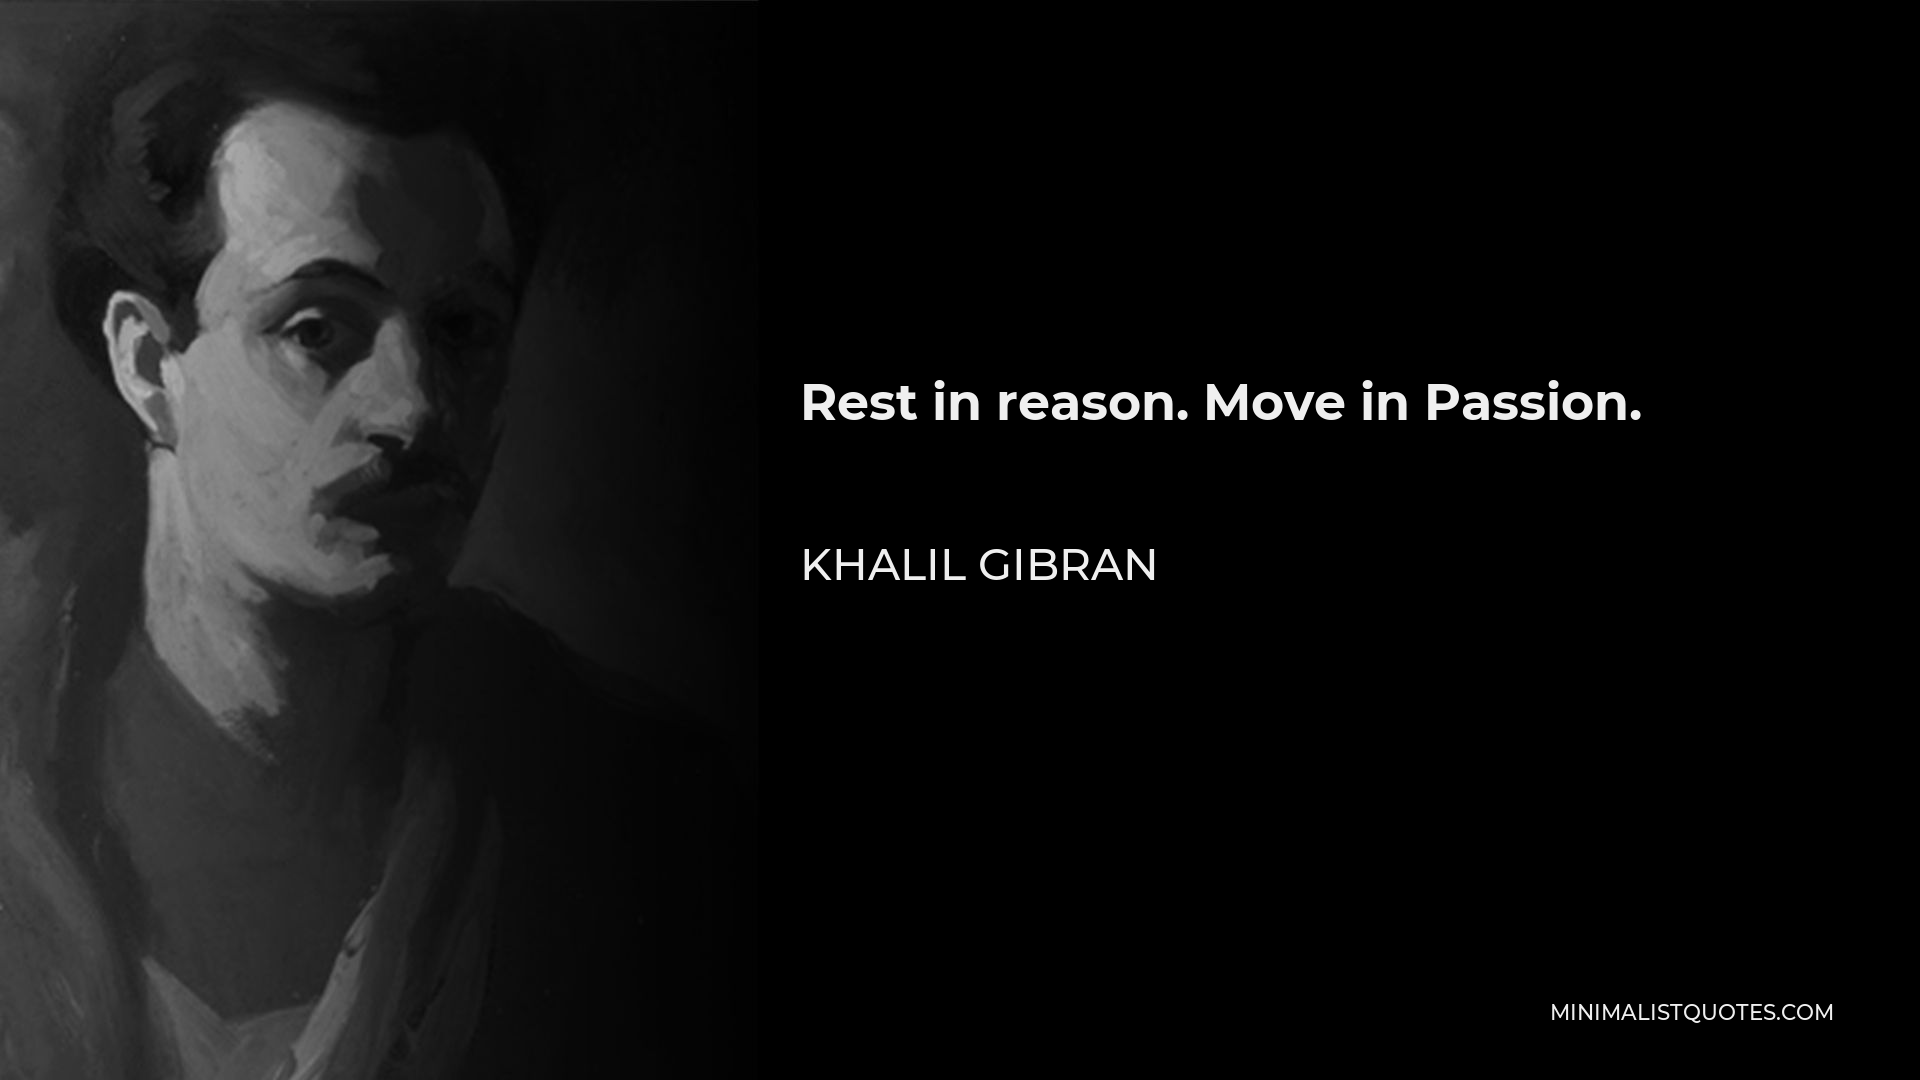 Khalil Gibran Quote - Rest in reason. Move in Passion.